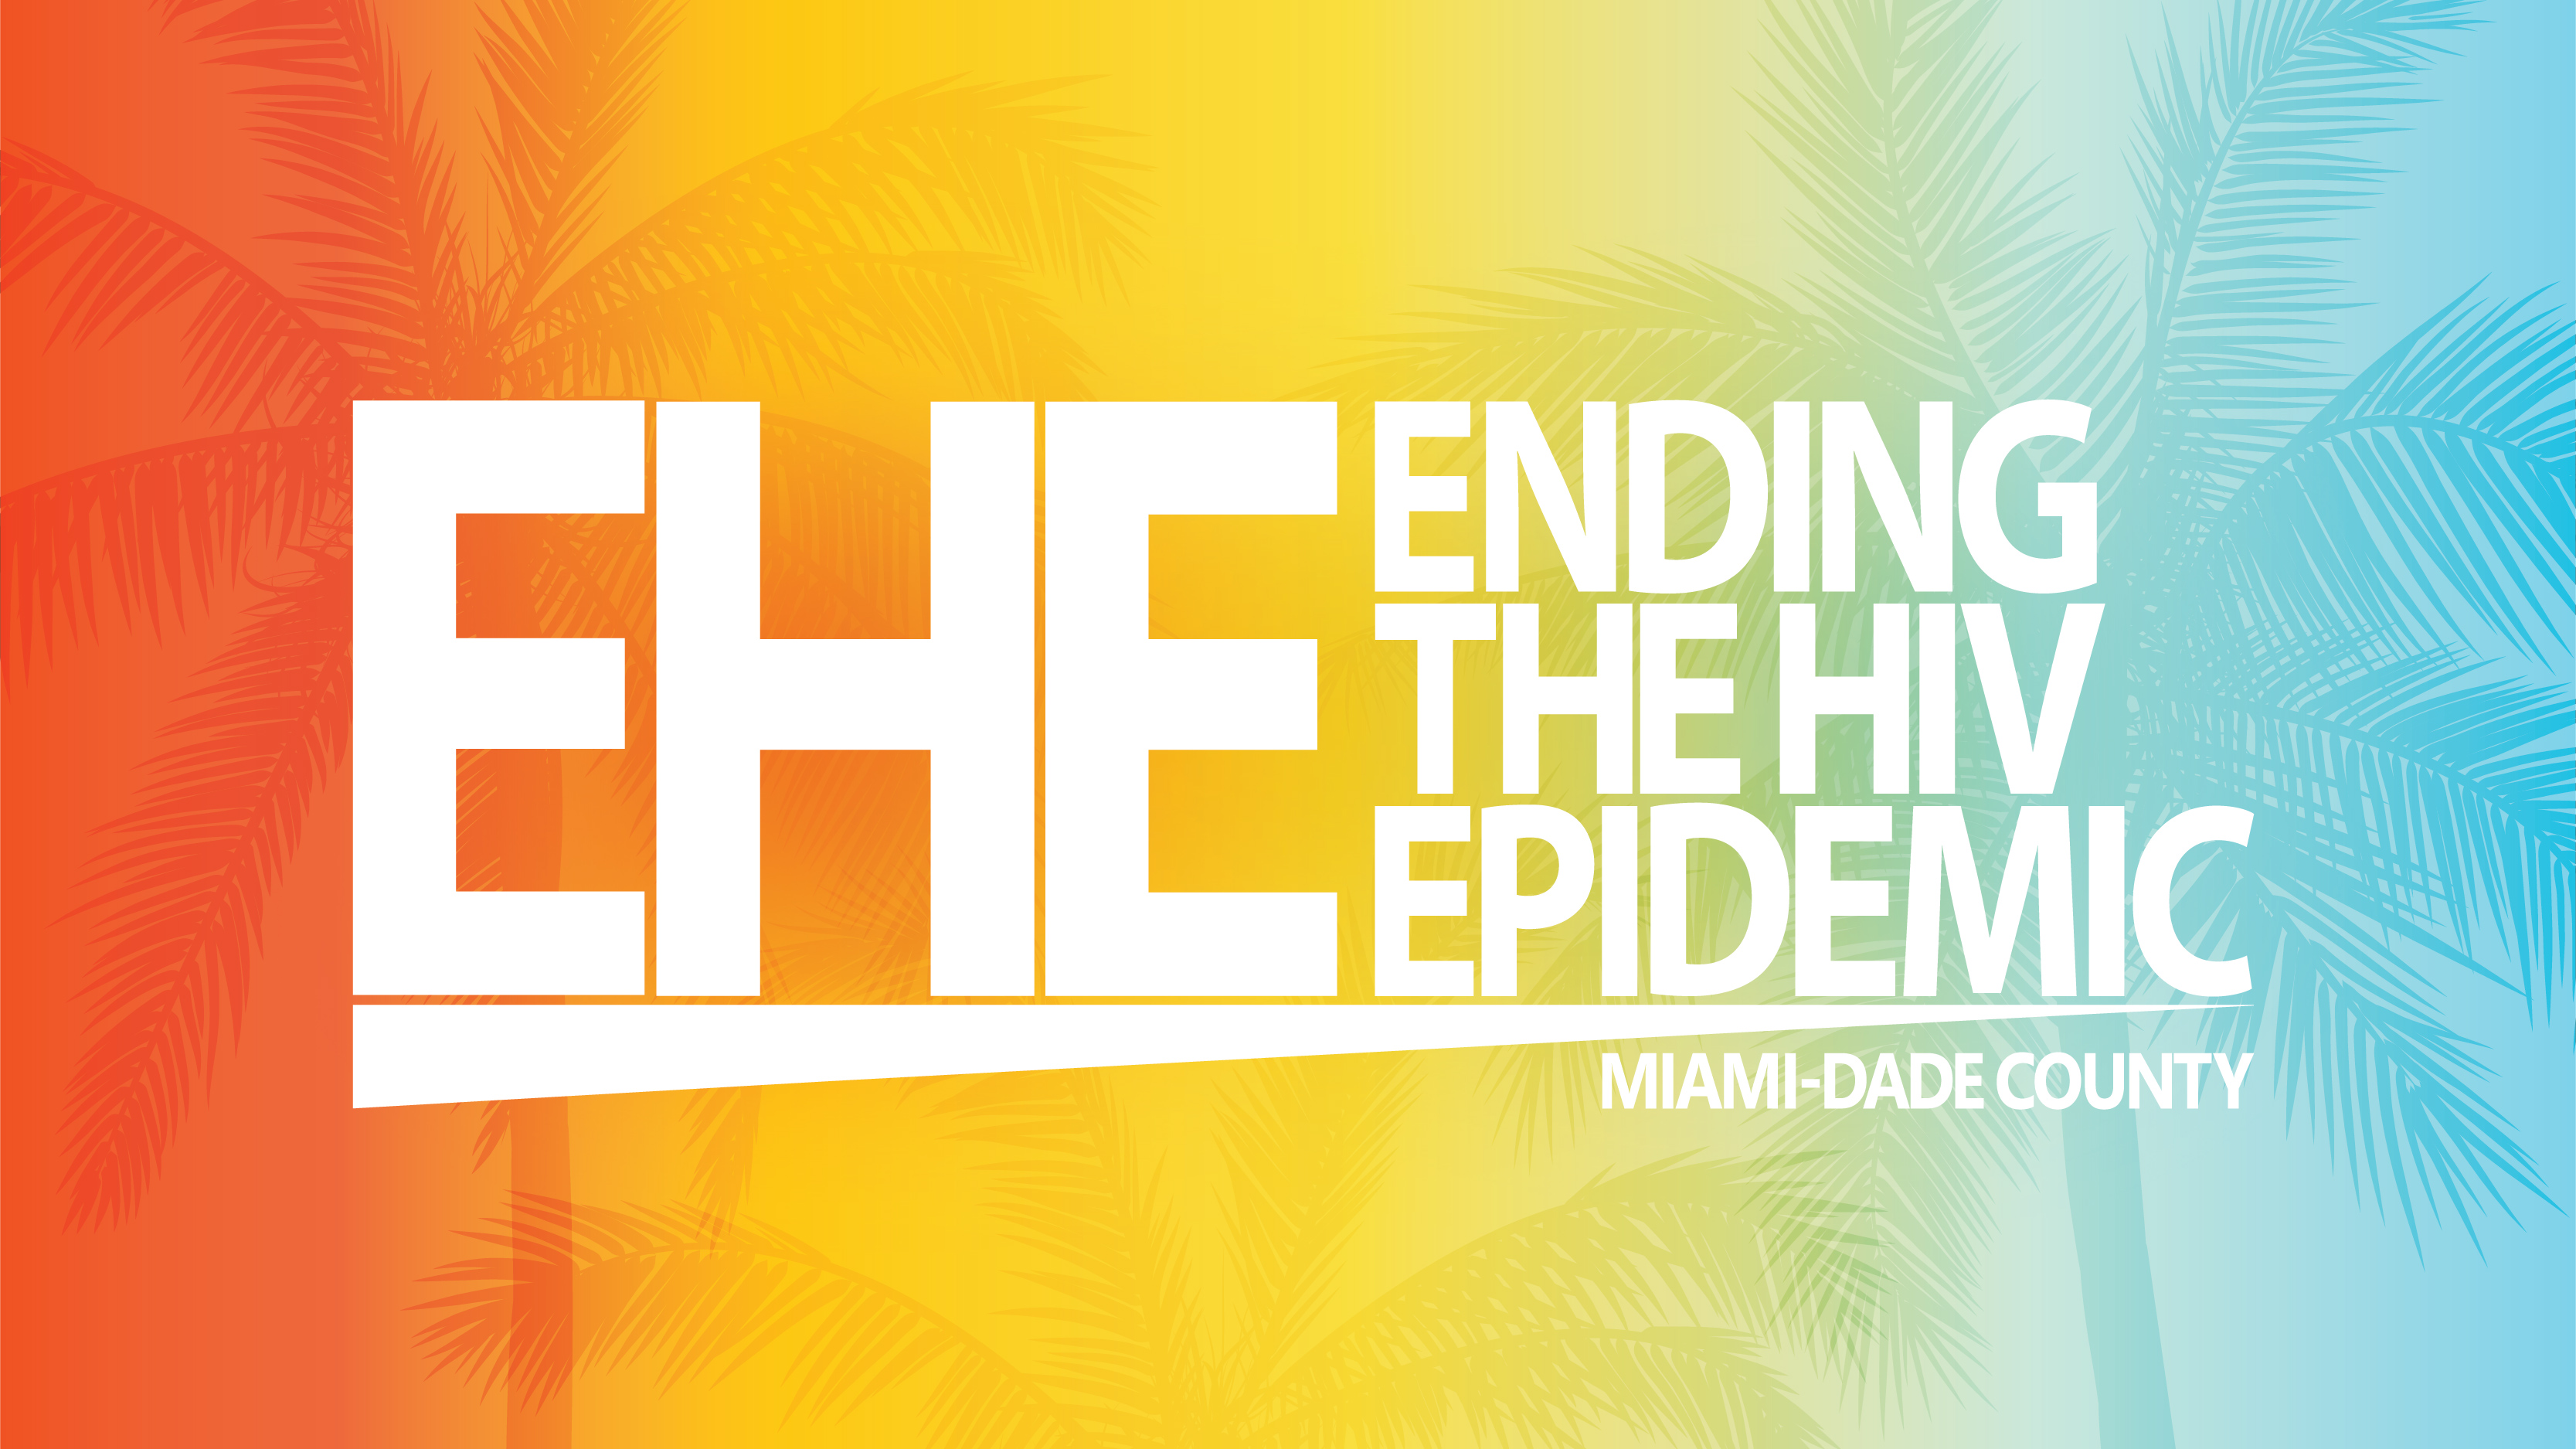 Image of a ending the hiv epidemic text